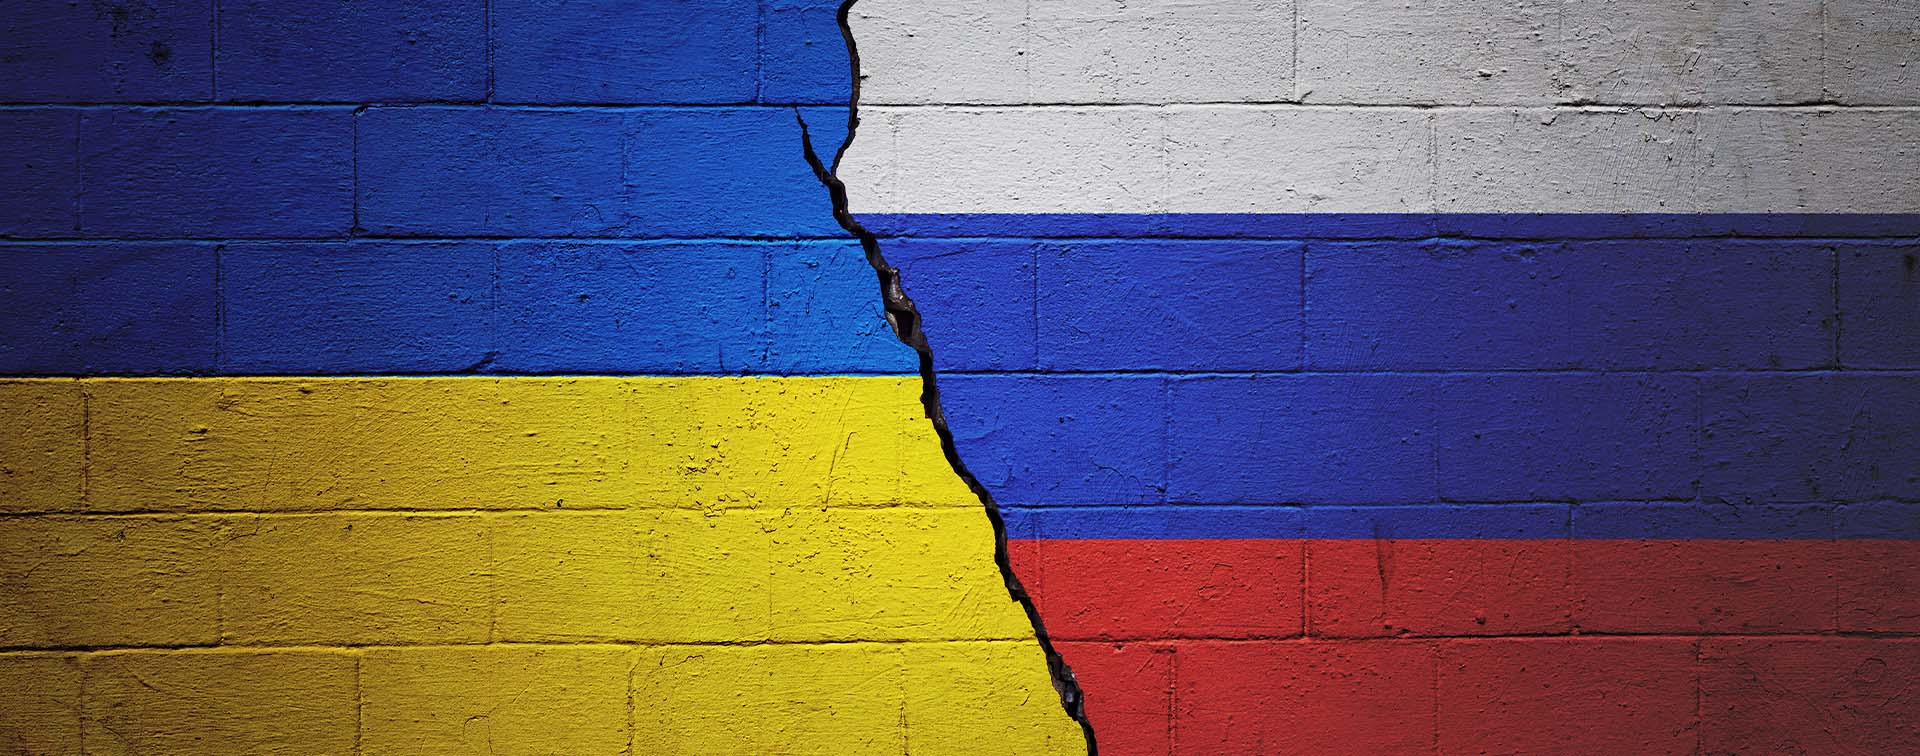 Cracked brick wall painted with Ukraine flag on the one side and the Russian flag on the other side of the crack